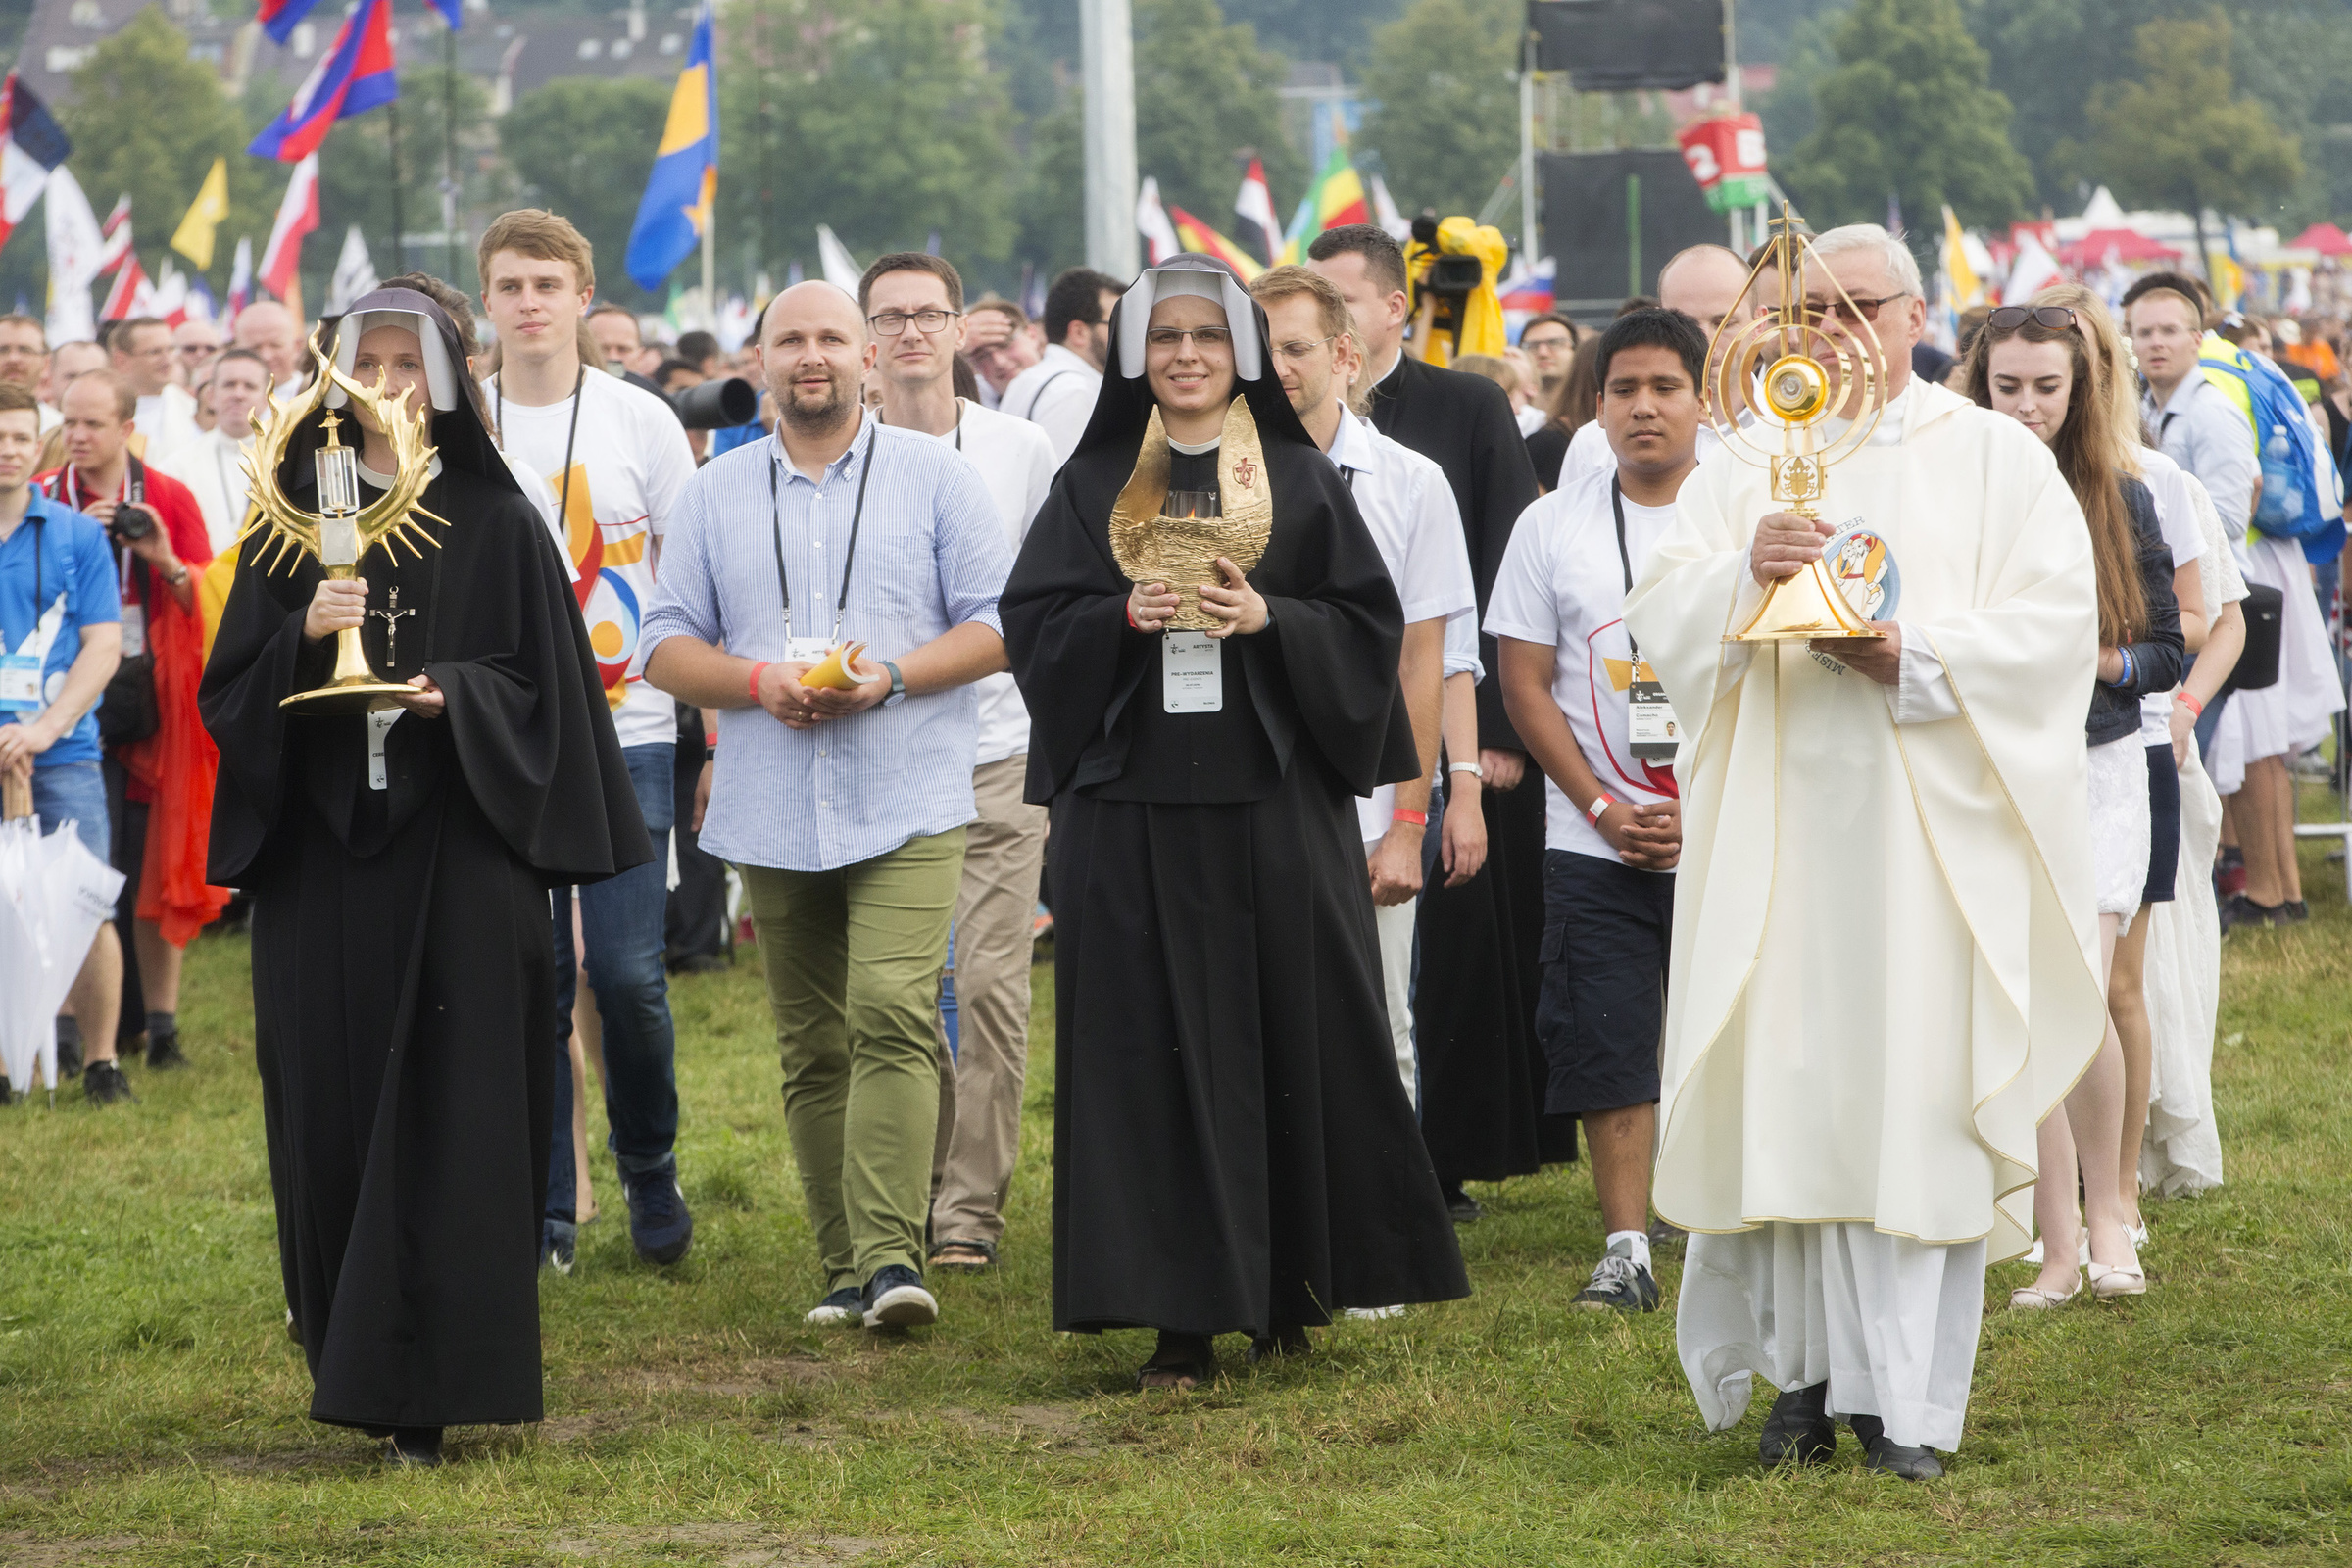 Pope Francis to join more than 2 million at World Youth Day in Krakow